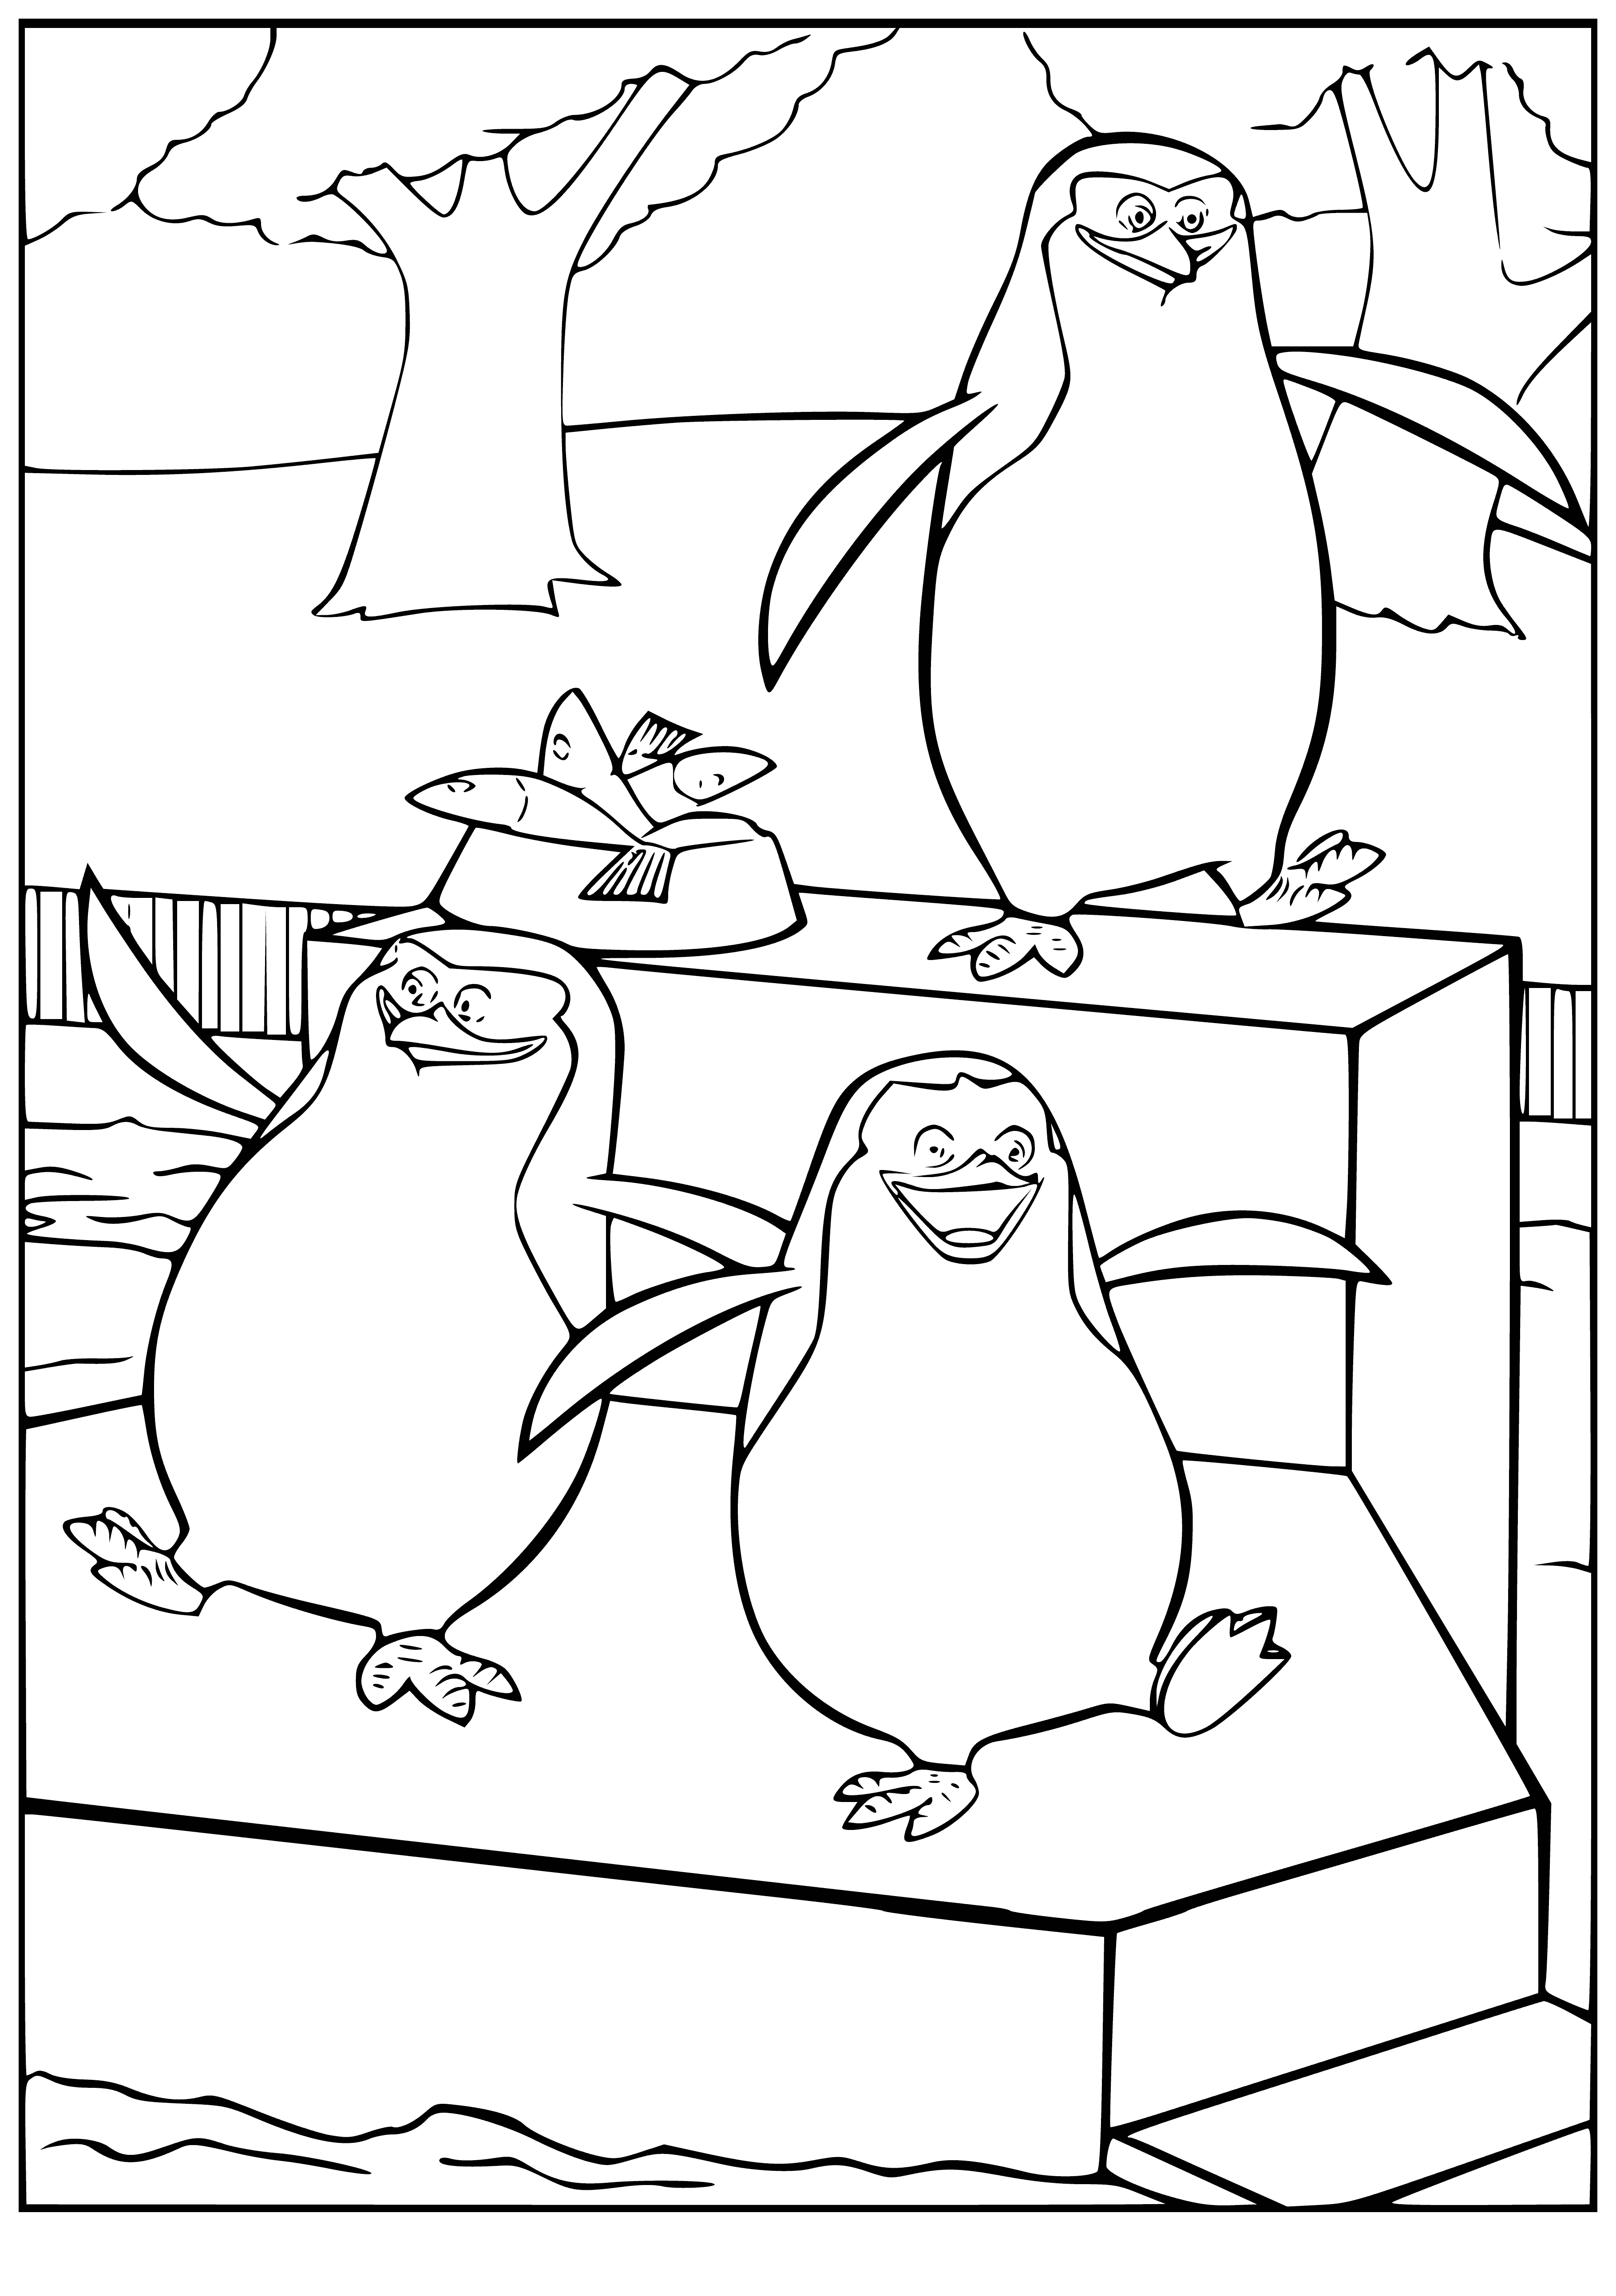 Penguins of Madagascar coloring page